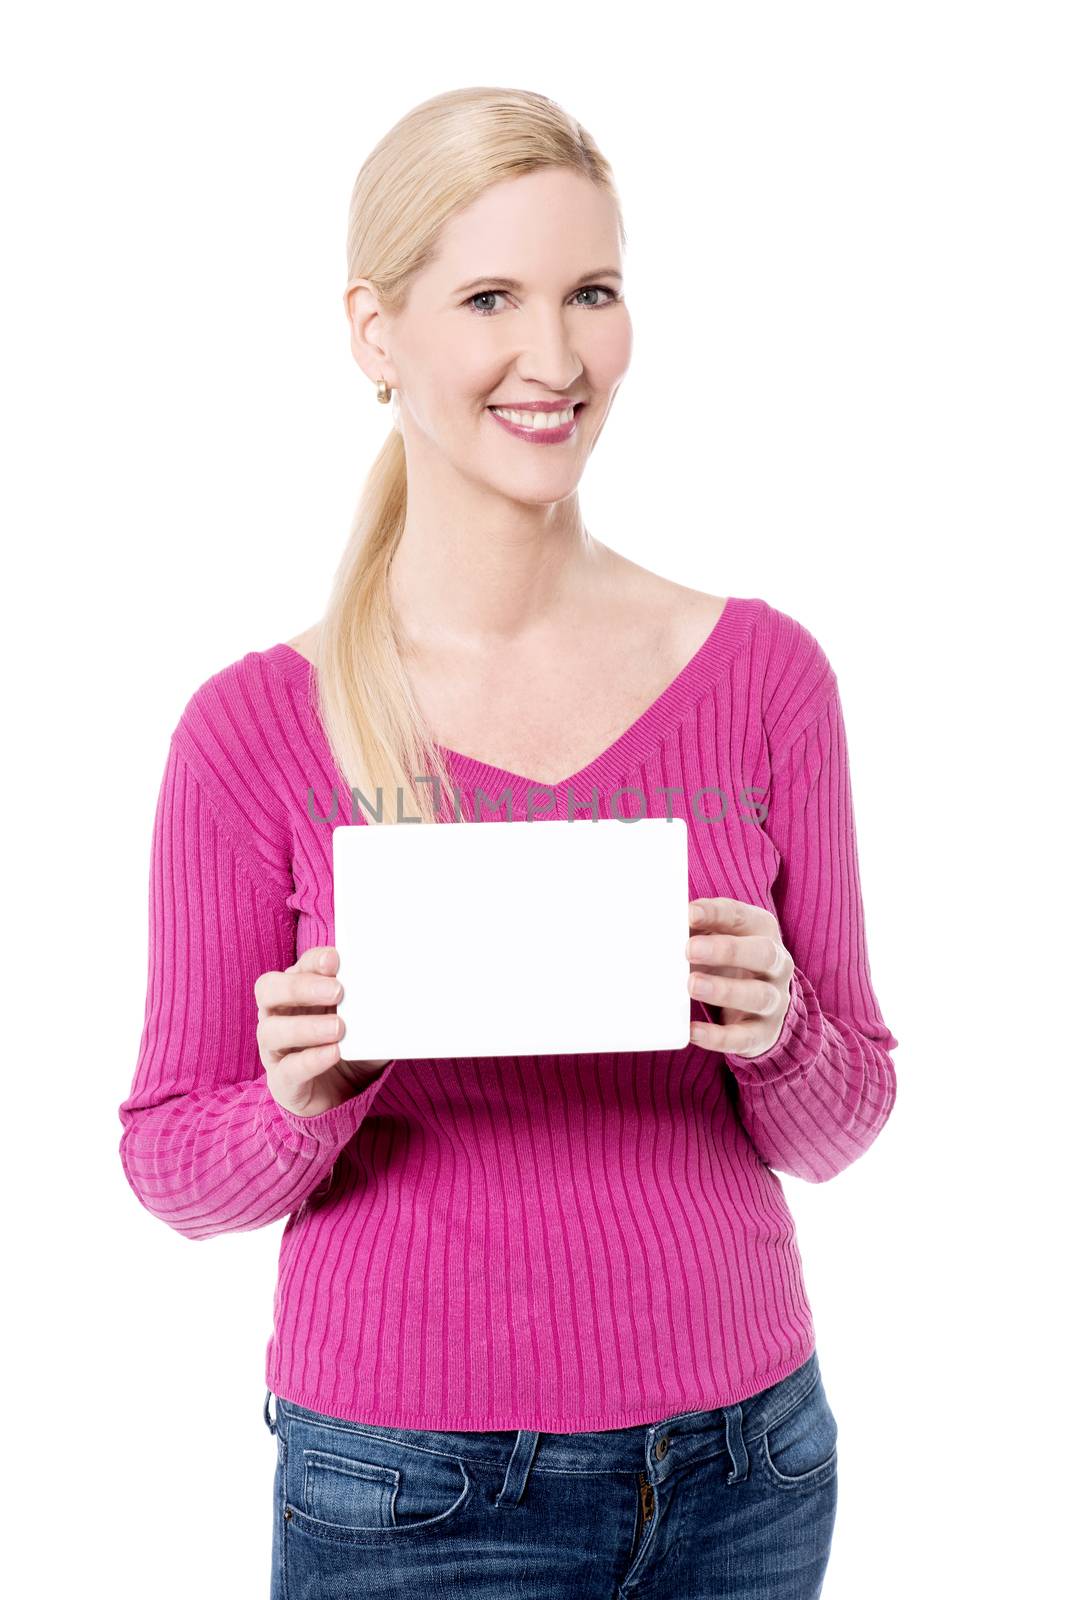 Smiling woman showing blank white ad board.